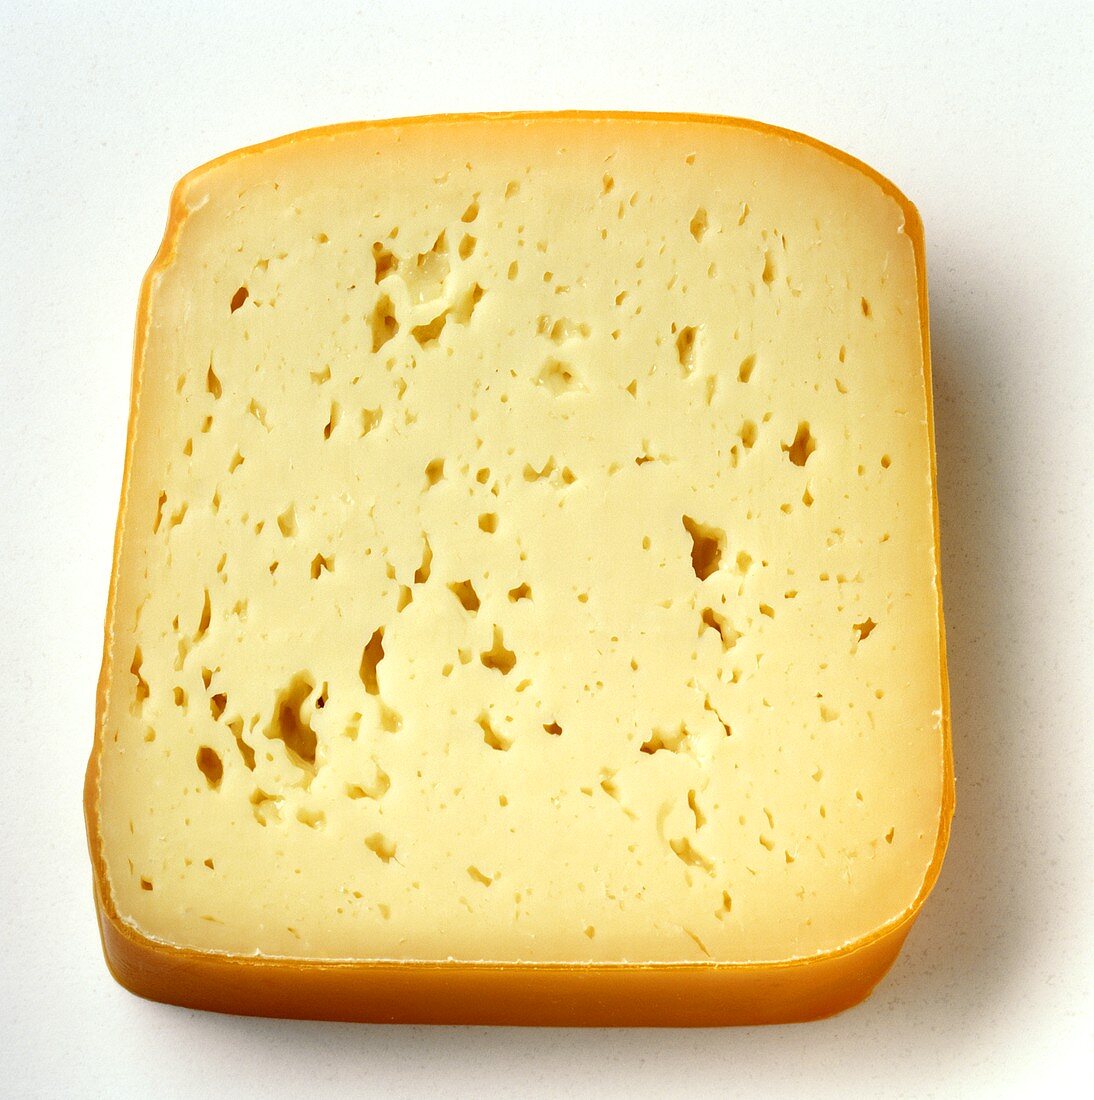 A slice of Tilsit cheese with rind